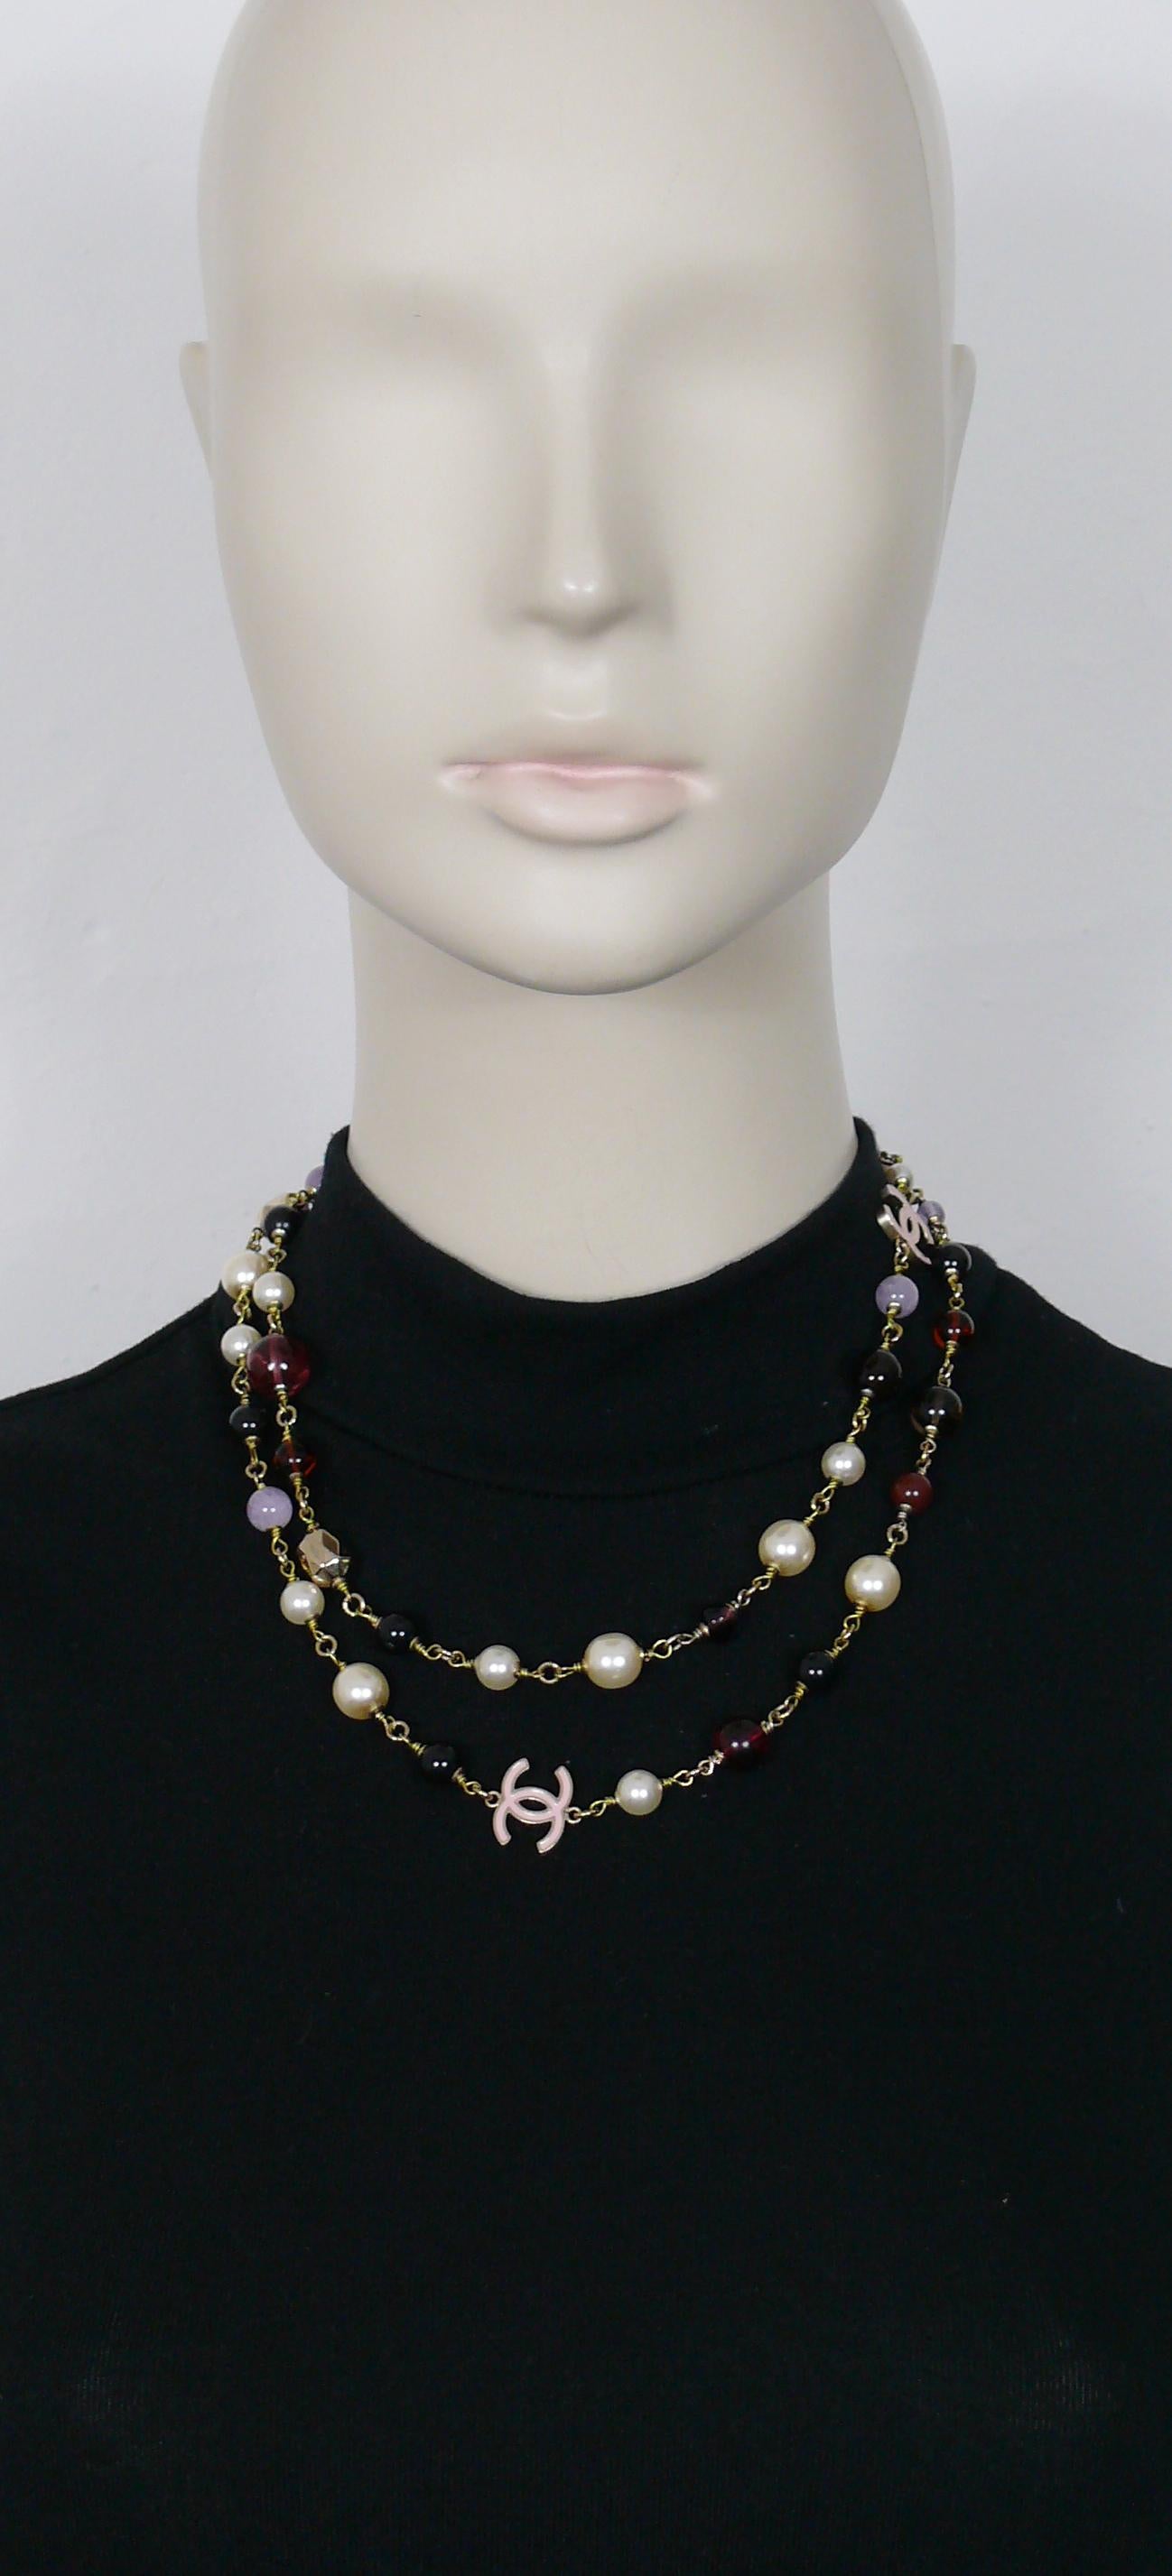 chanel beads necklace